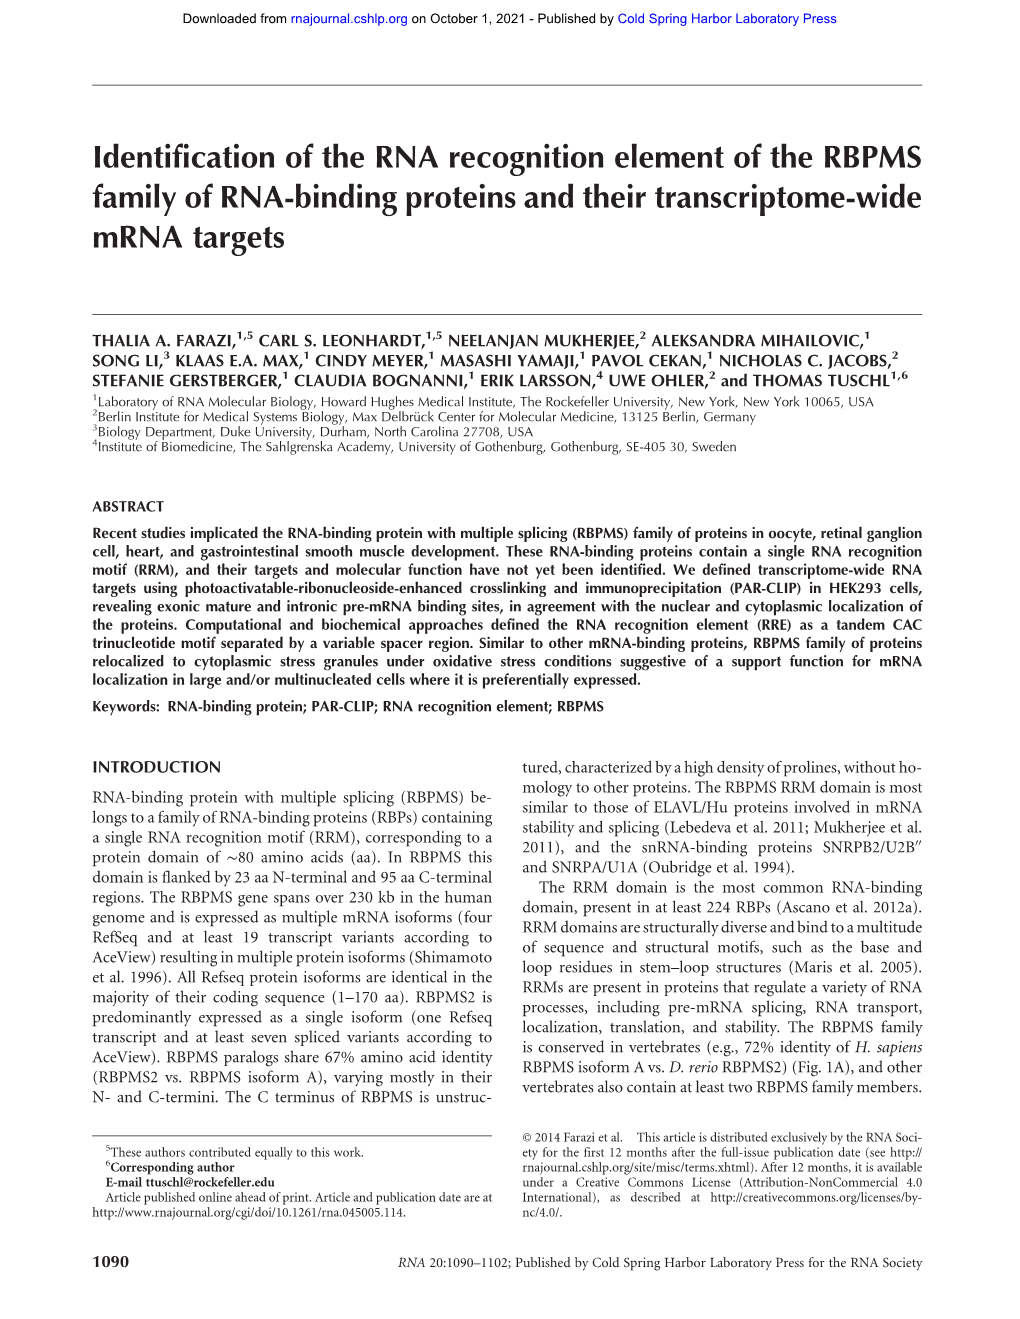 Identification of the RNA Recognition Element of the RBPMS Family of RNA-Binding Proteins and Their Transcriptome-Wide Mrna Targets